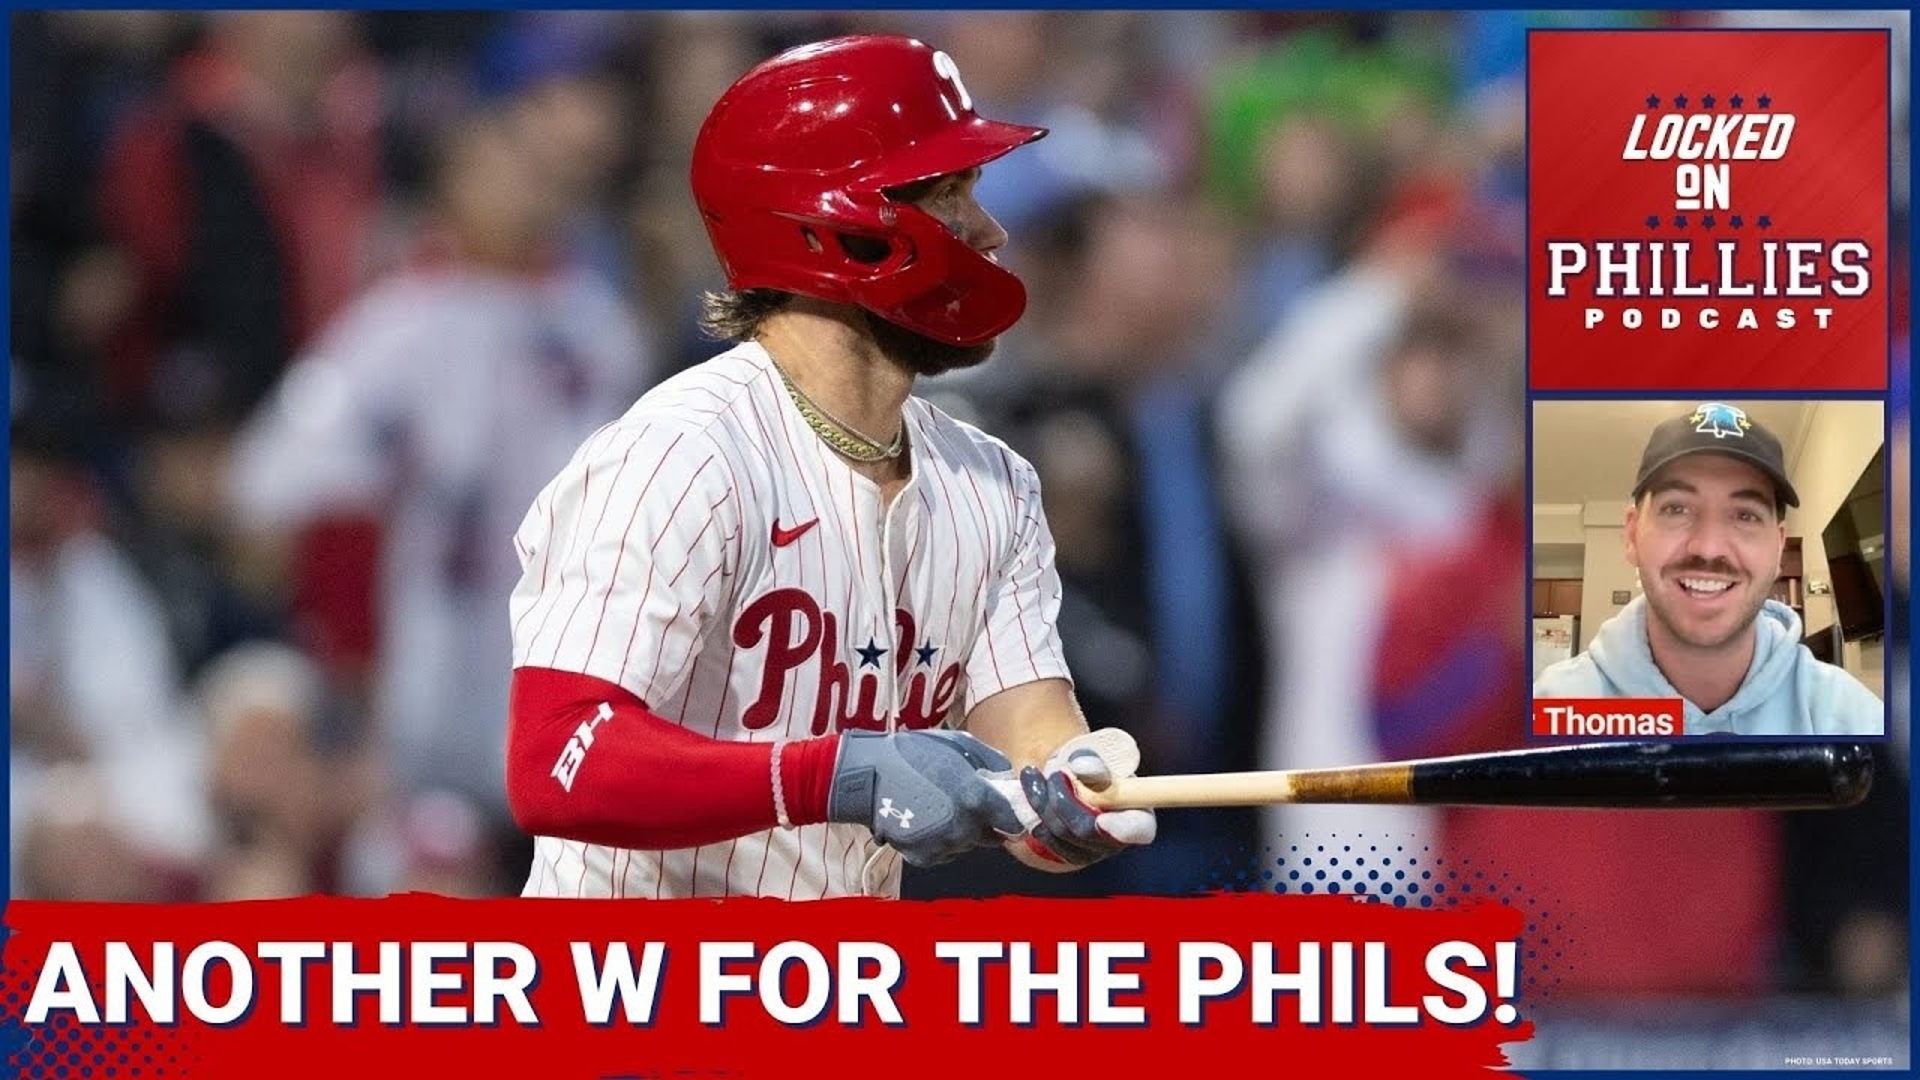 In today's episode, Connor breaks down the sloppy game last night between the Philadelphia Phillies and New York Mets.